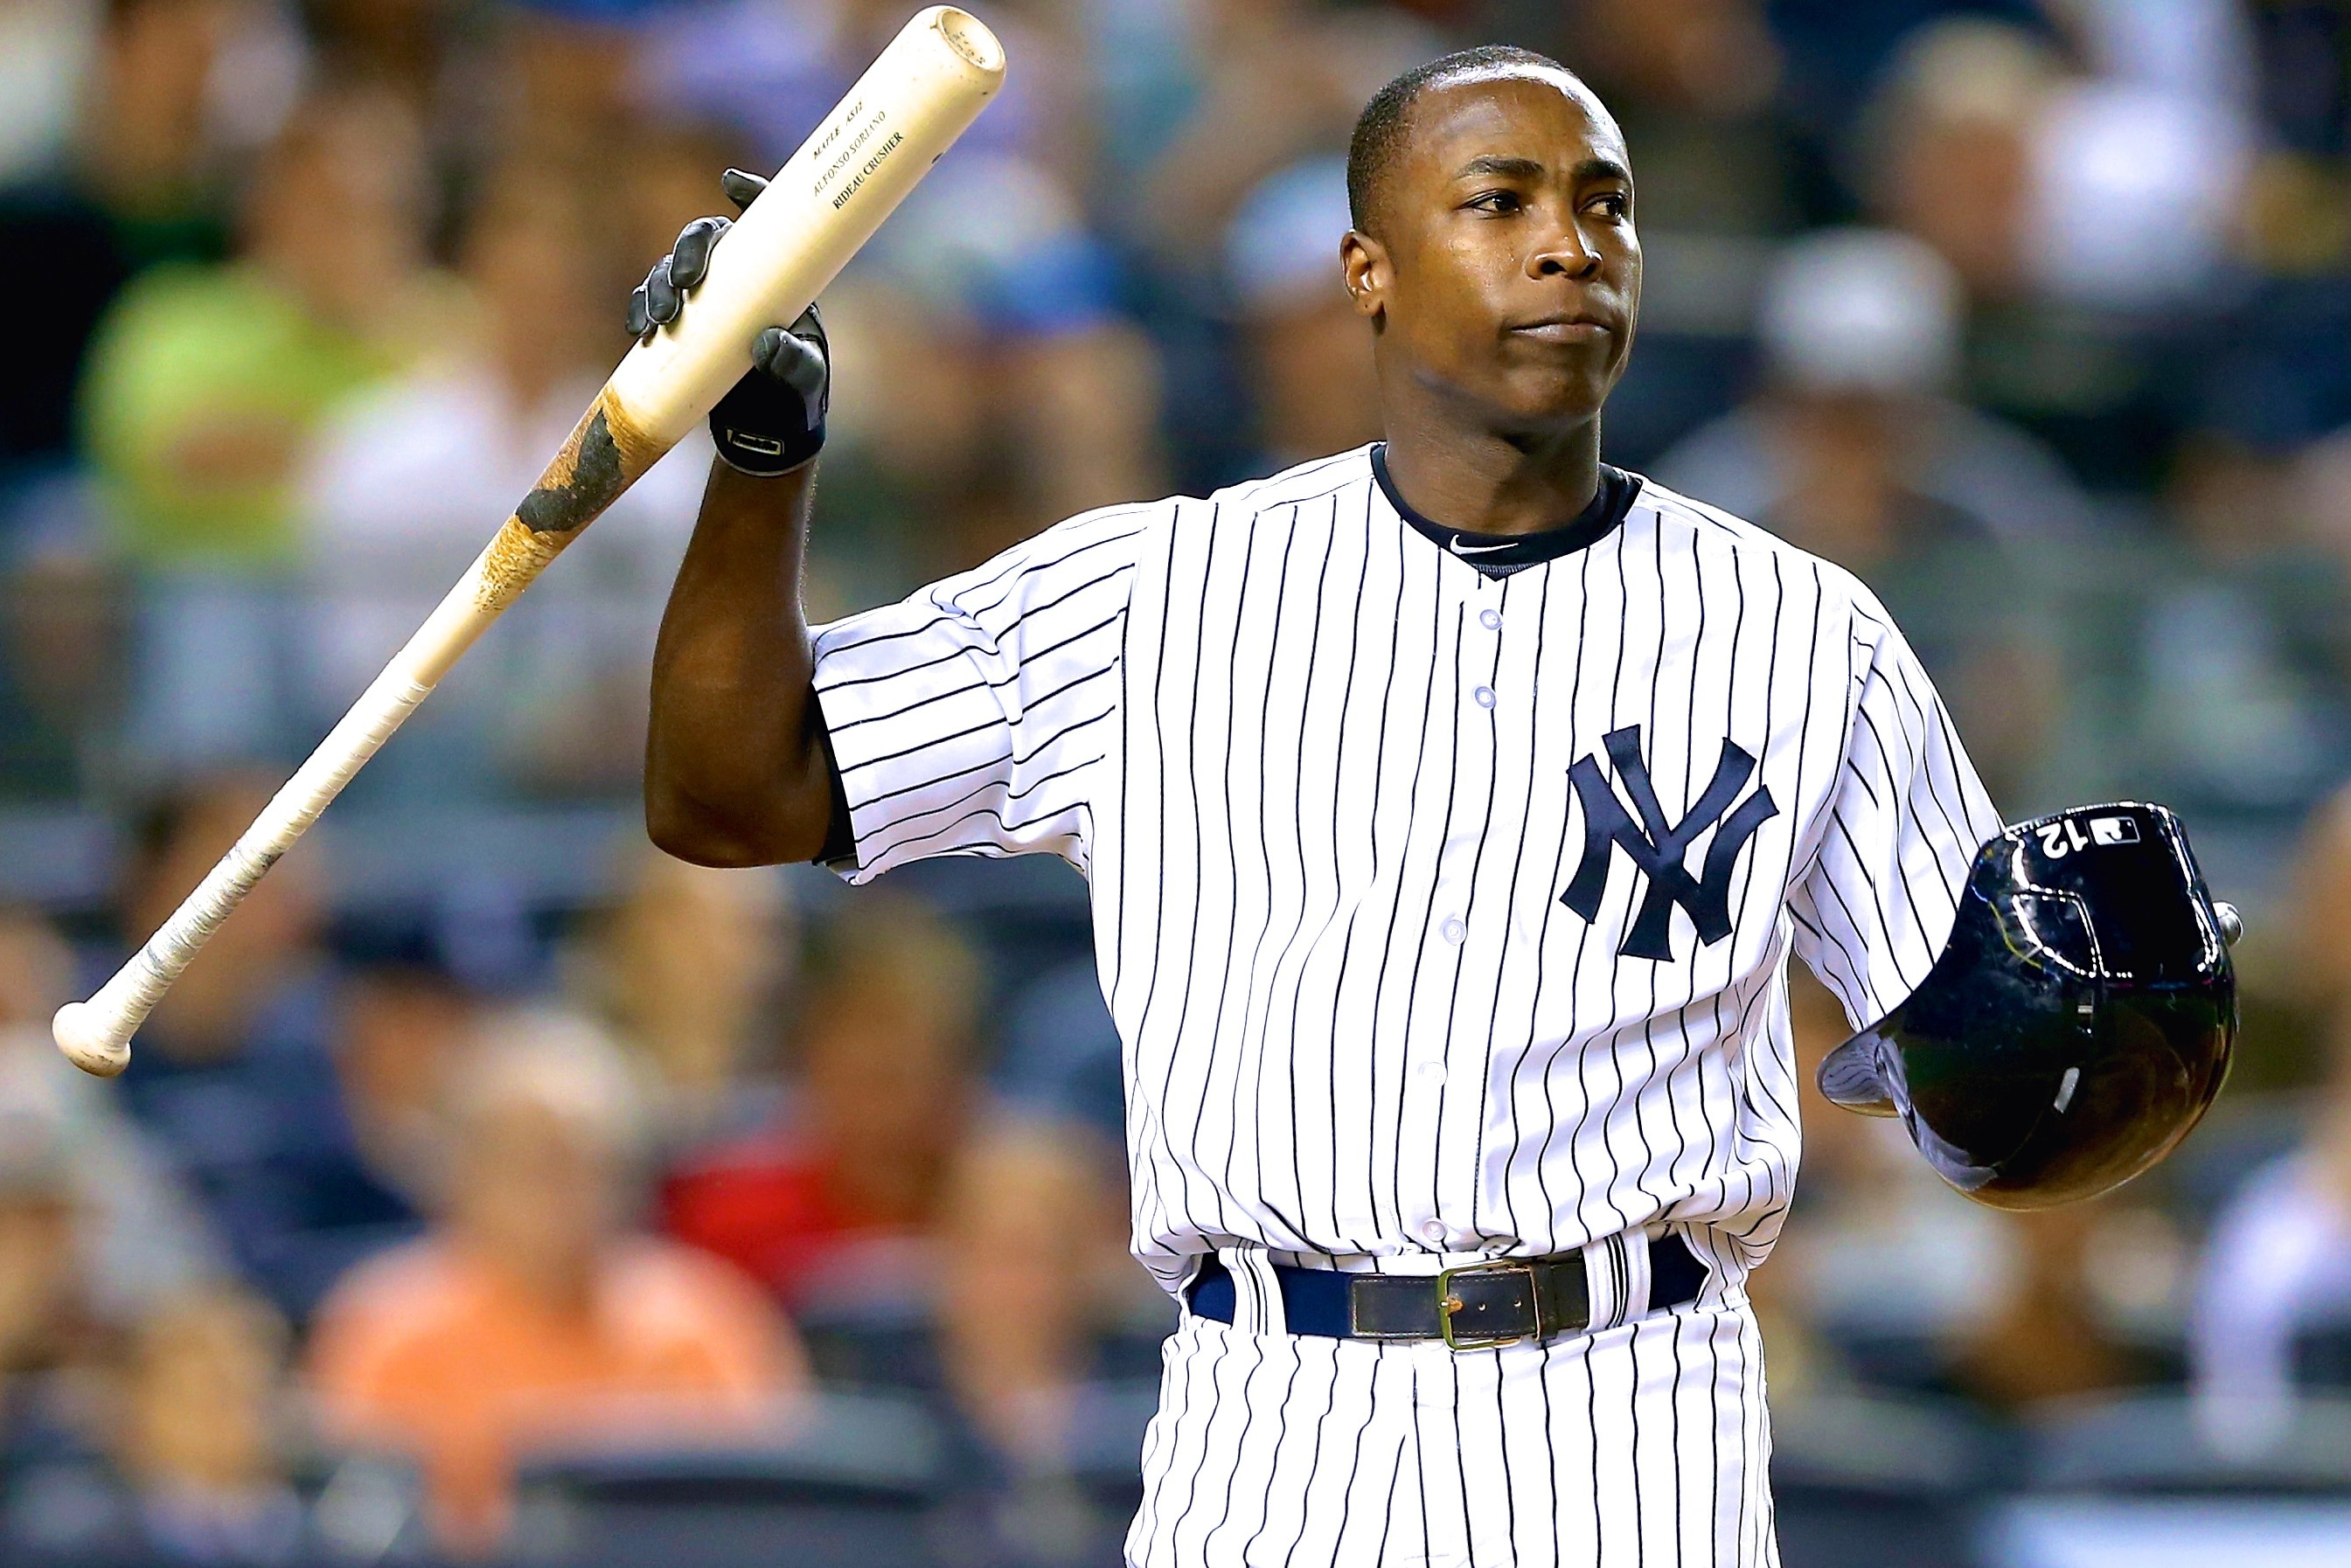 The Yankees appear to be buyers, but adding Alfonso Soriano won't